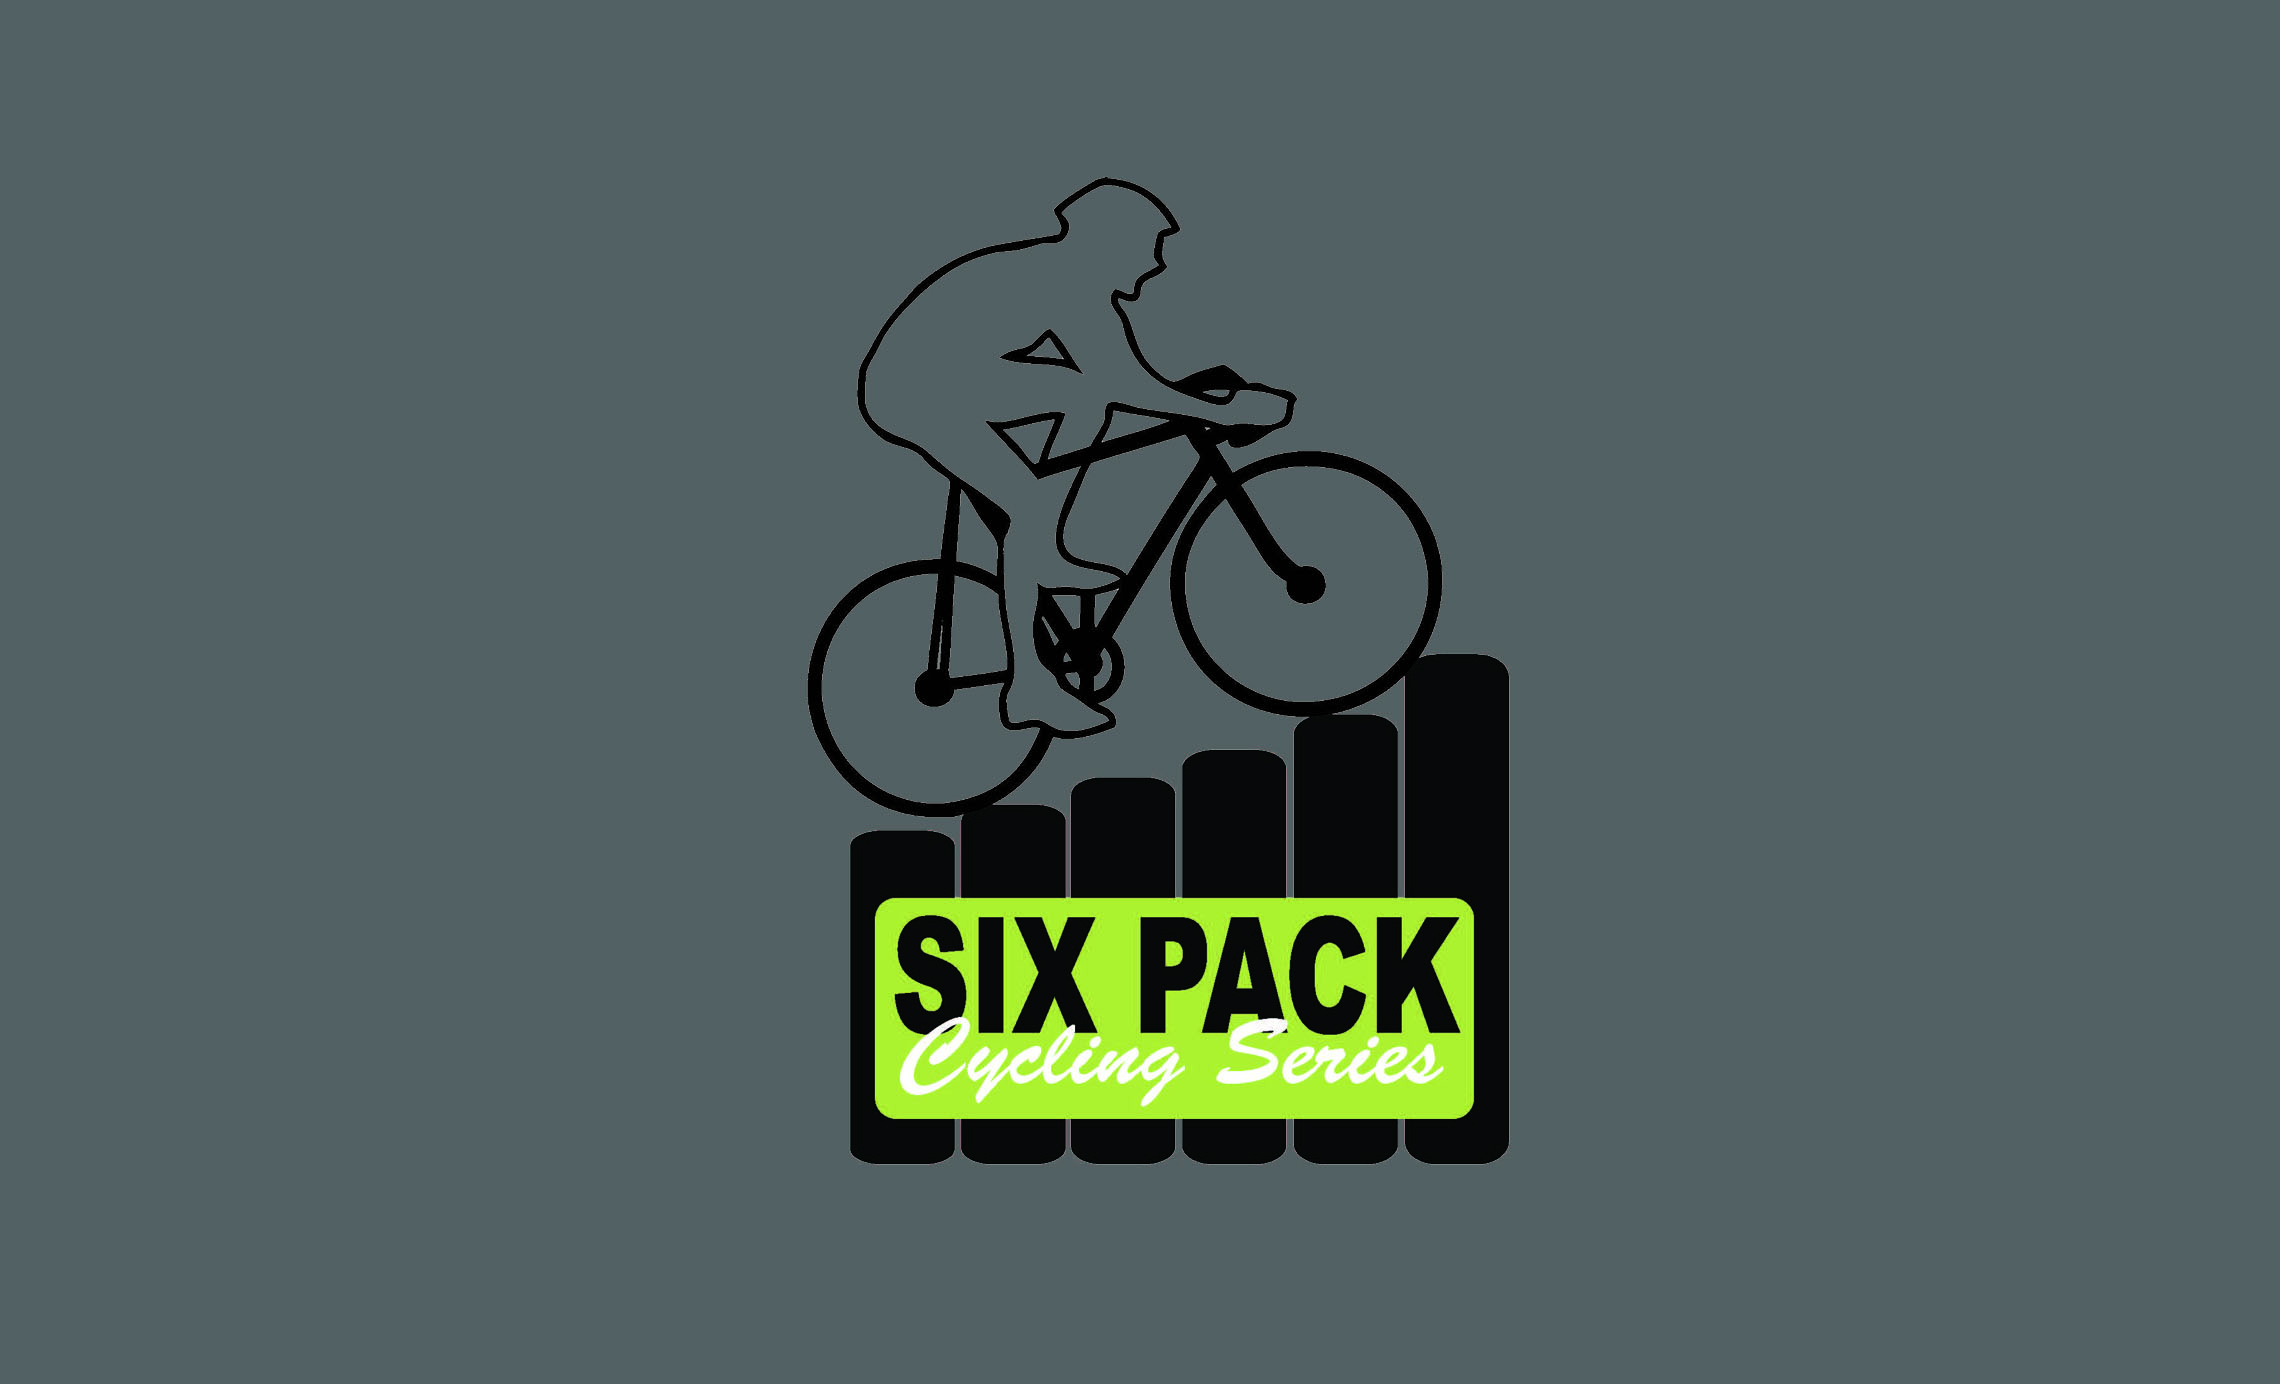 The Six Pack Cycling Series Kicks off with Tour de Hope